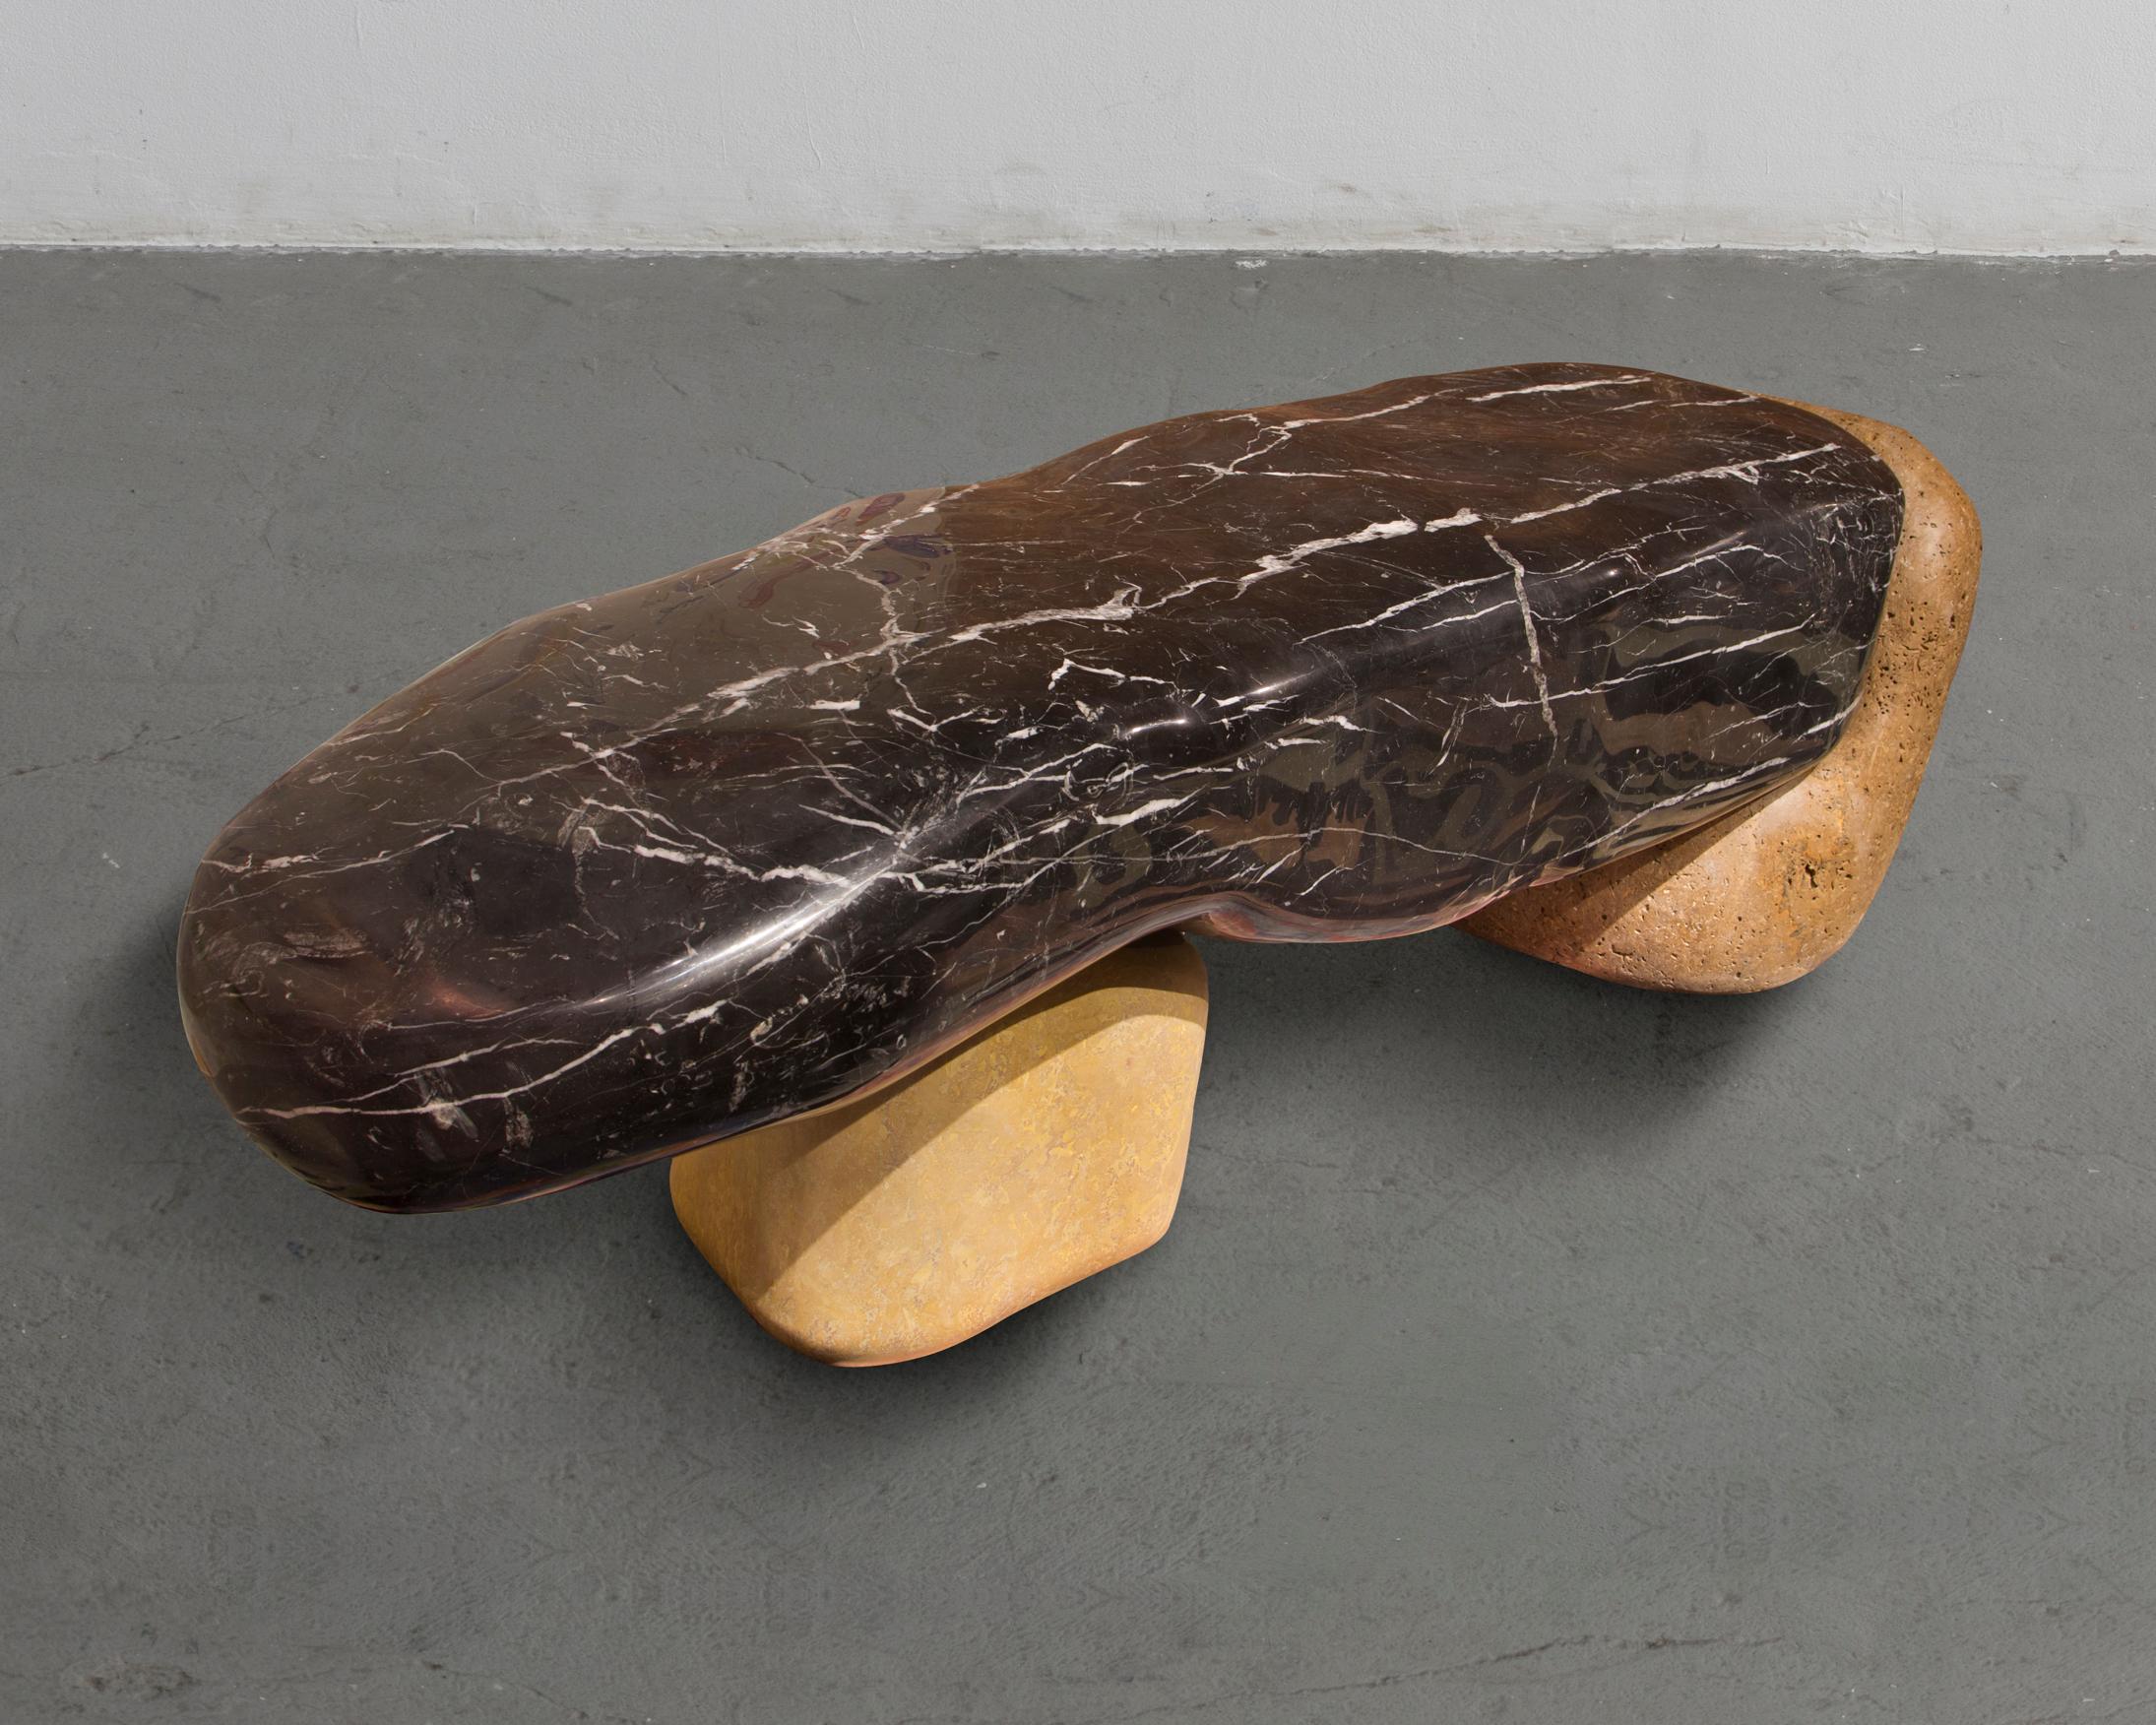 American Bench in Three Marbles by Katie Stout